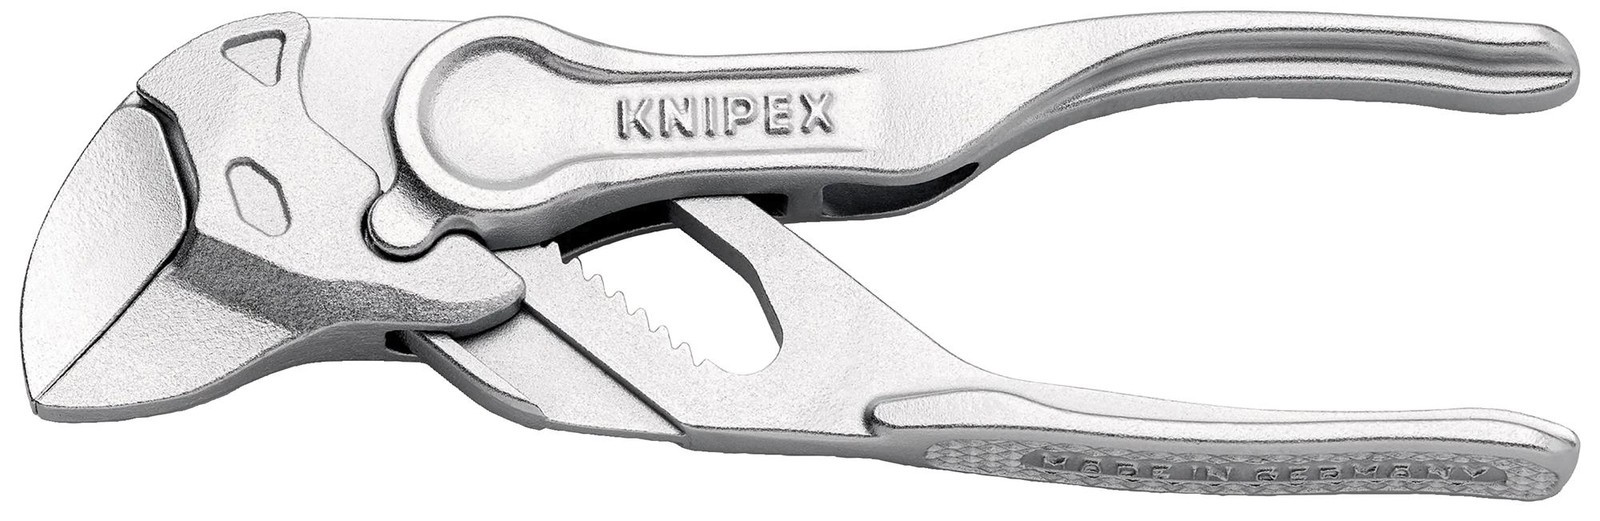 Knipex 86 04 100 Plier, Wrench, 100mm, 21mm